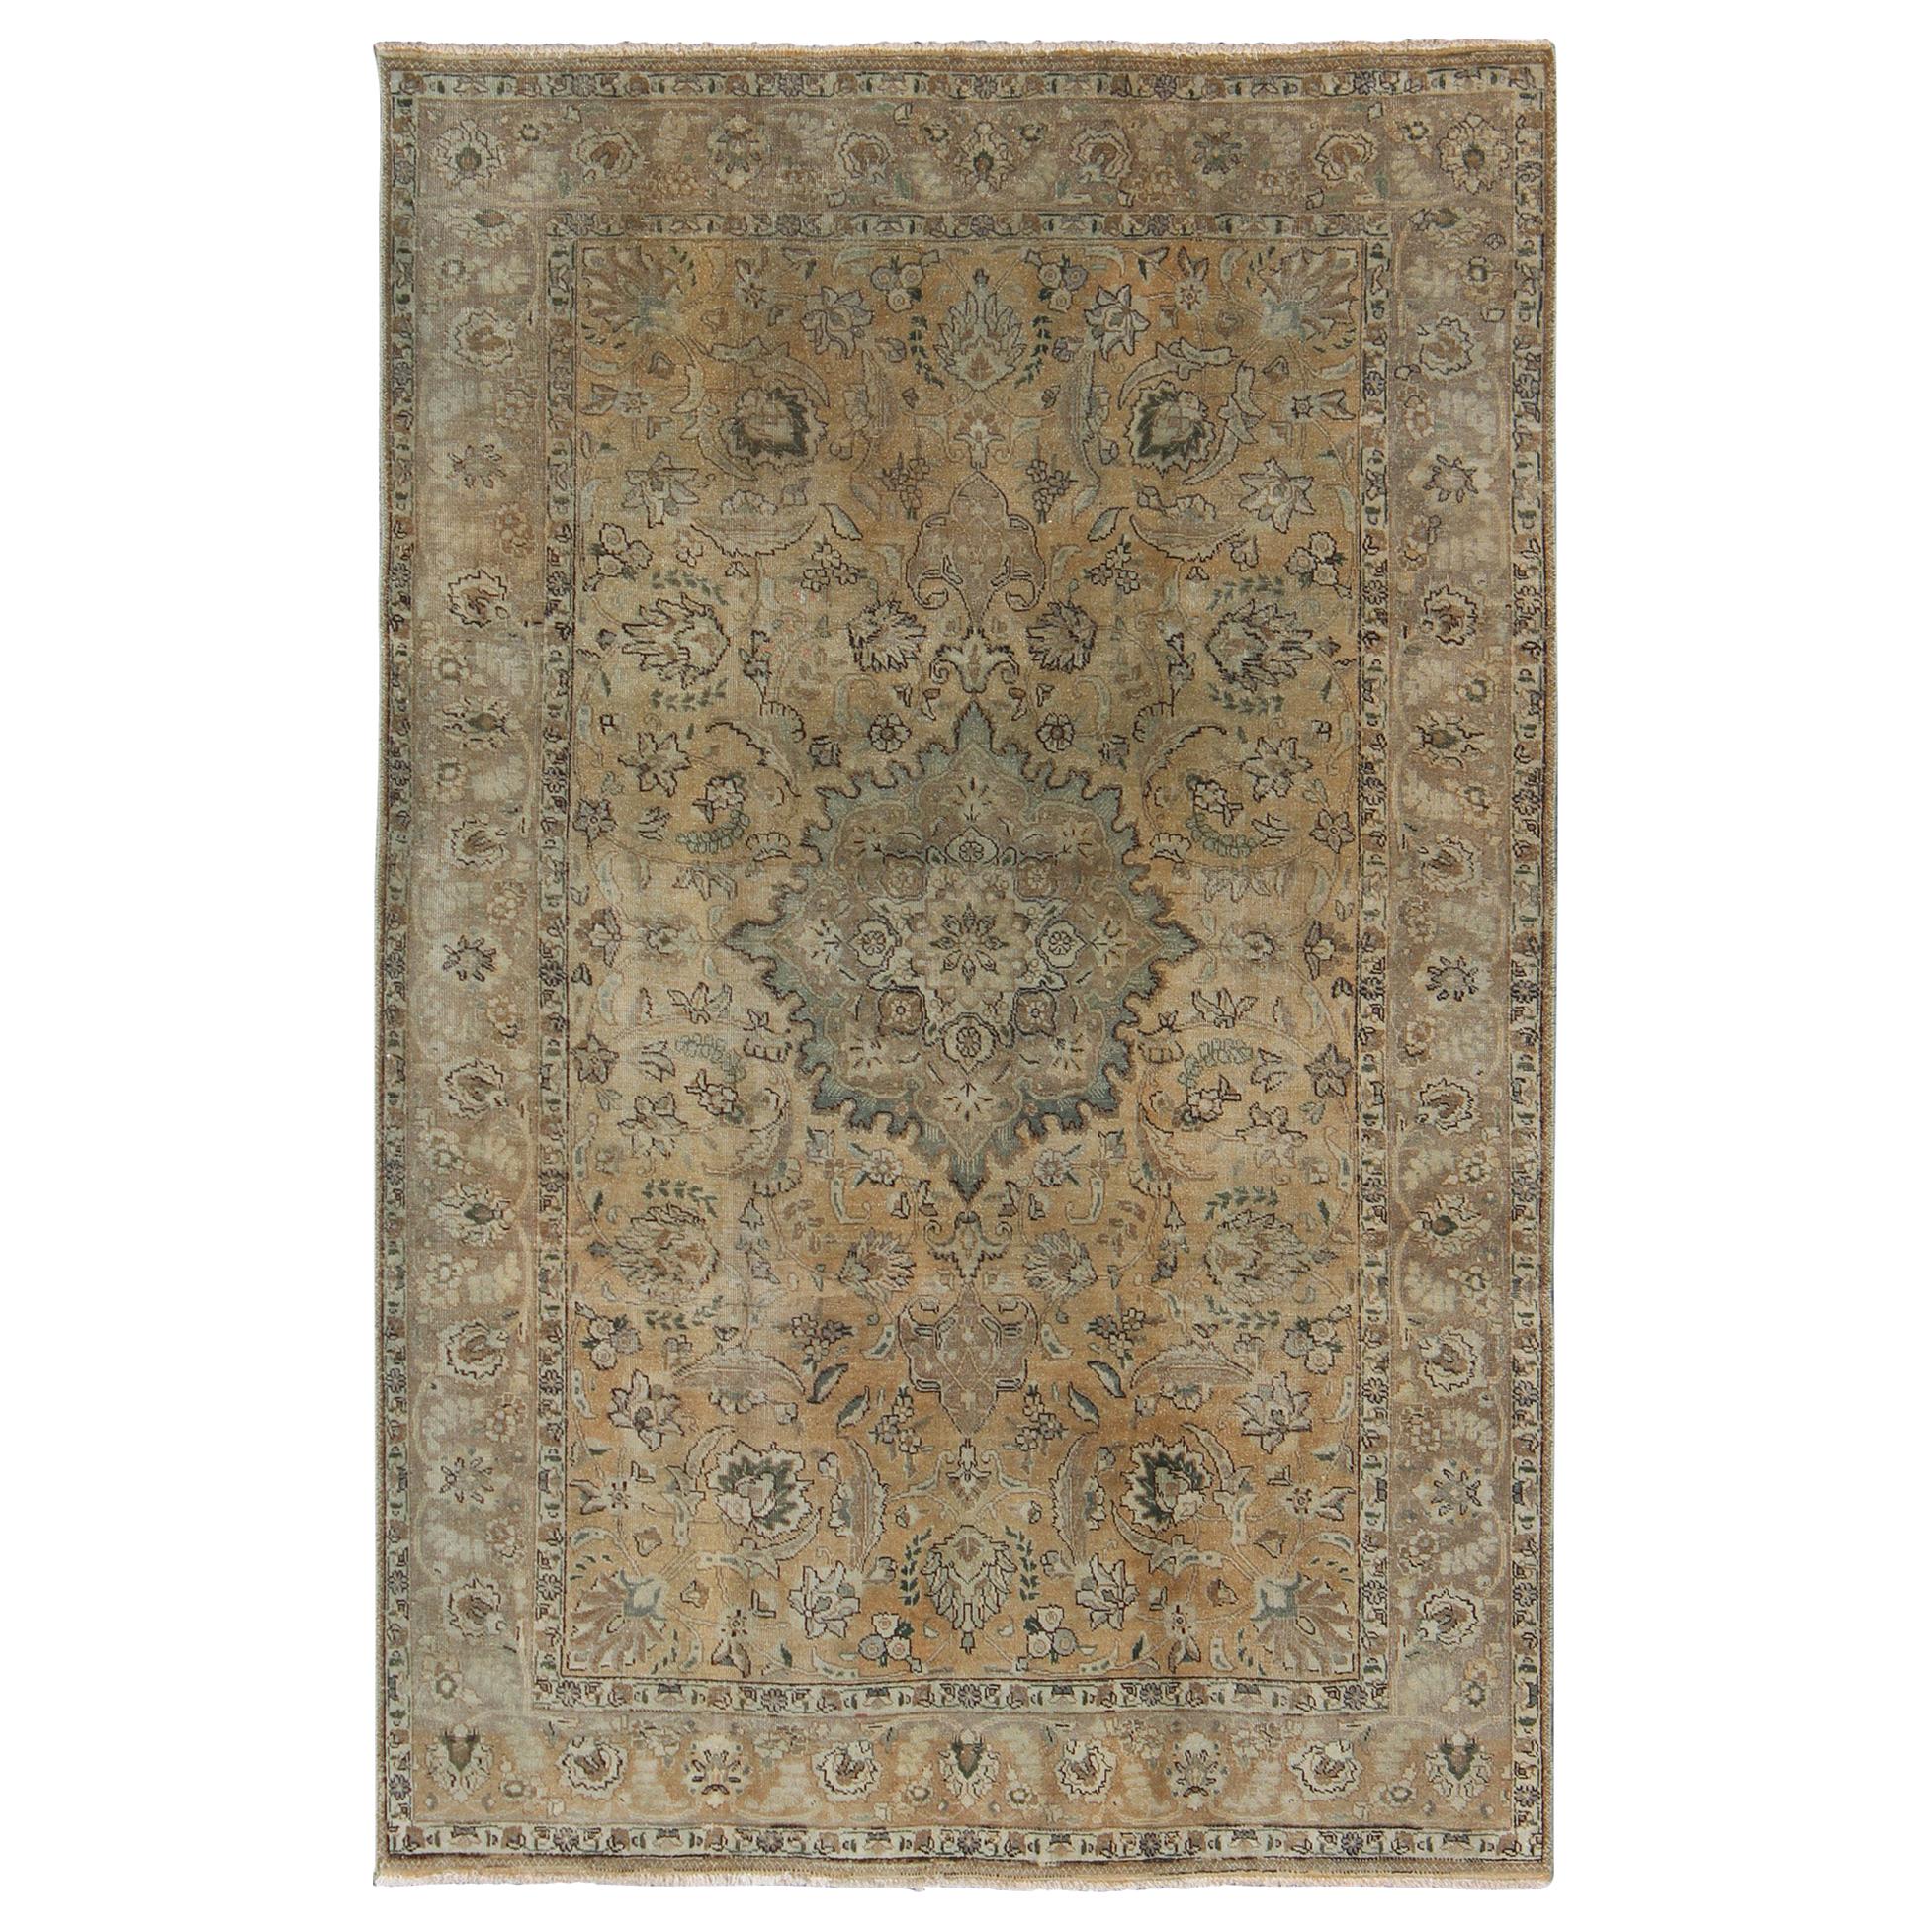 Shades of Tan, Taupe, Cream and Vintage Persian Tabriz Rug with Medallion Design